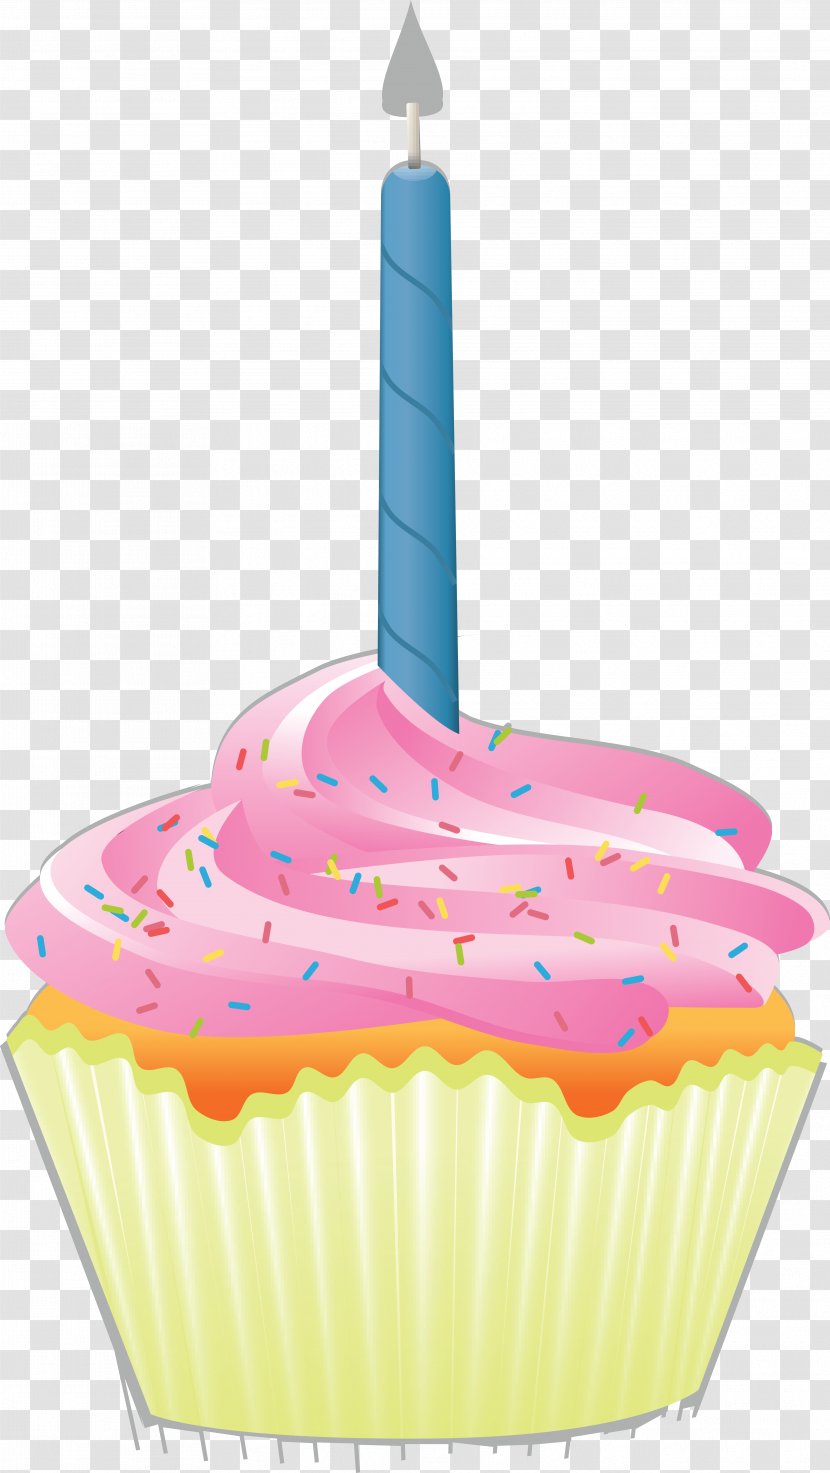 Cupcake Birthday Cake Muffin Clip Art - Candle - Candles Transparent PNG